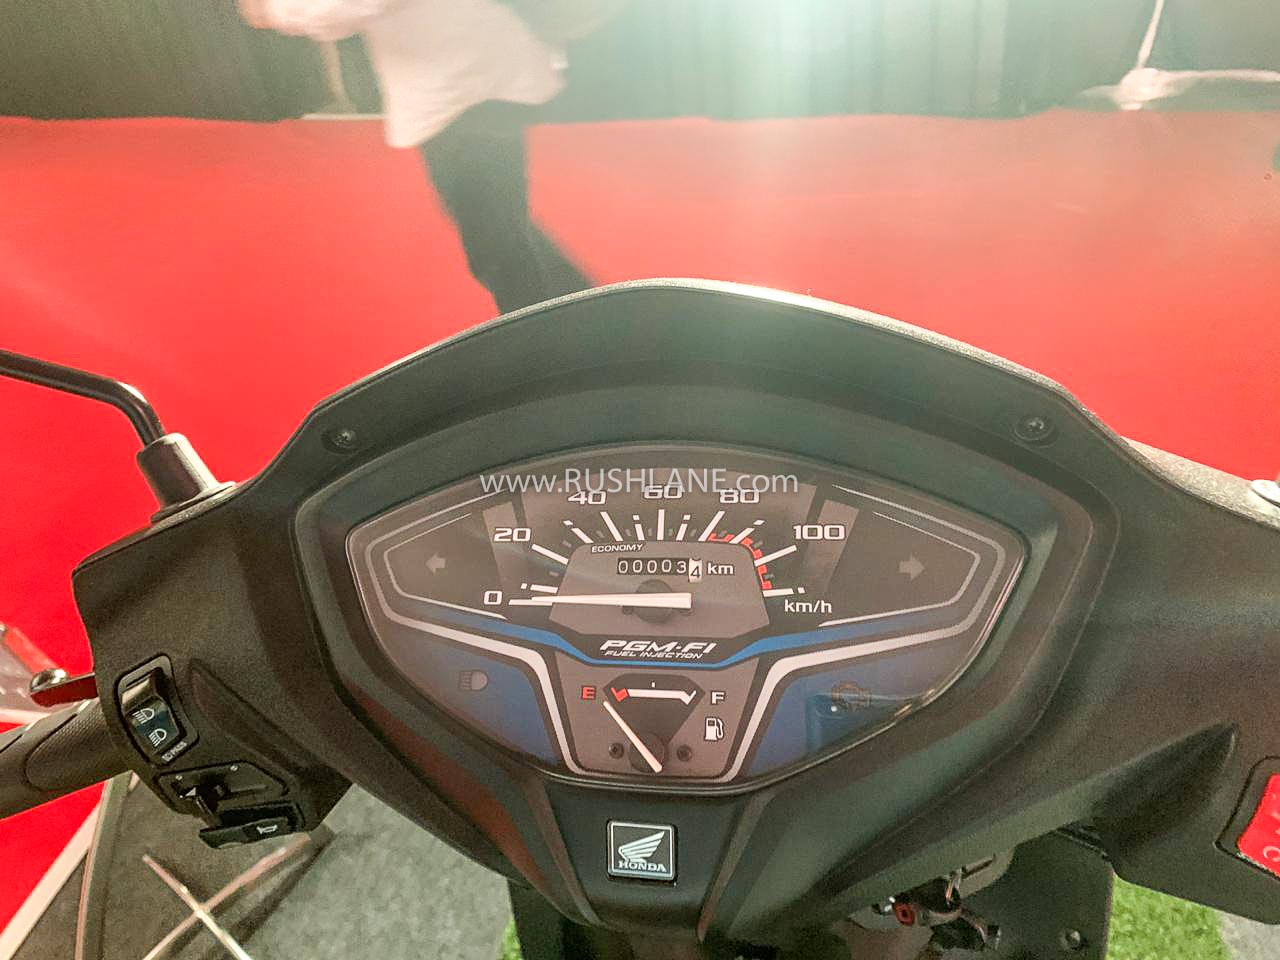 Honda Activa 6g Bs6 Scooter Launch Price Rs 64k Gets 6 Changes